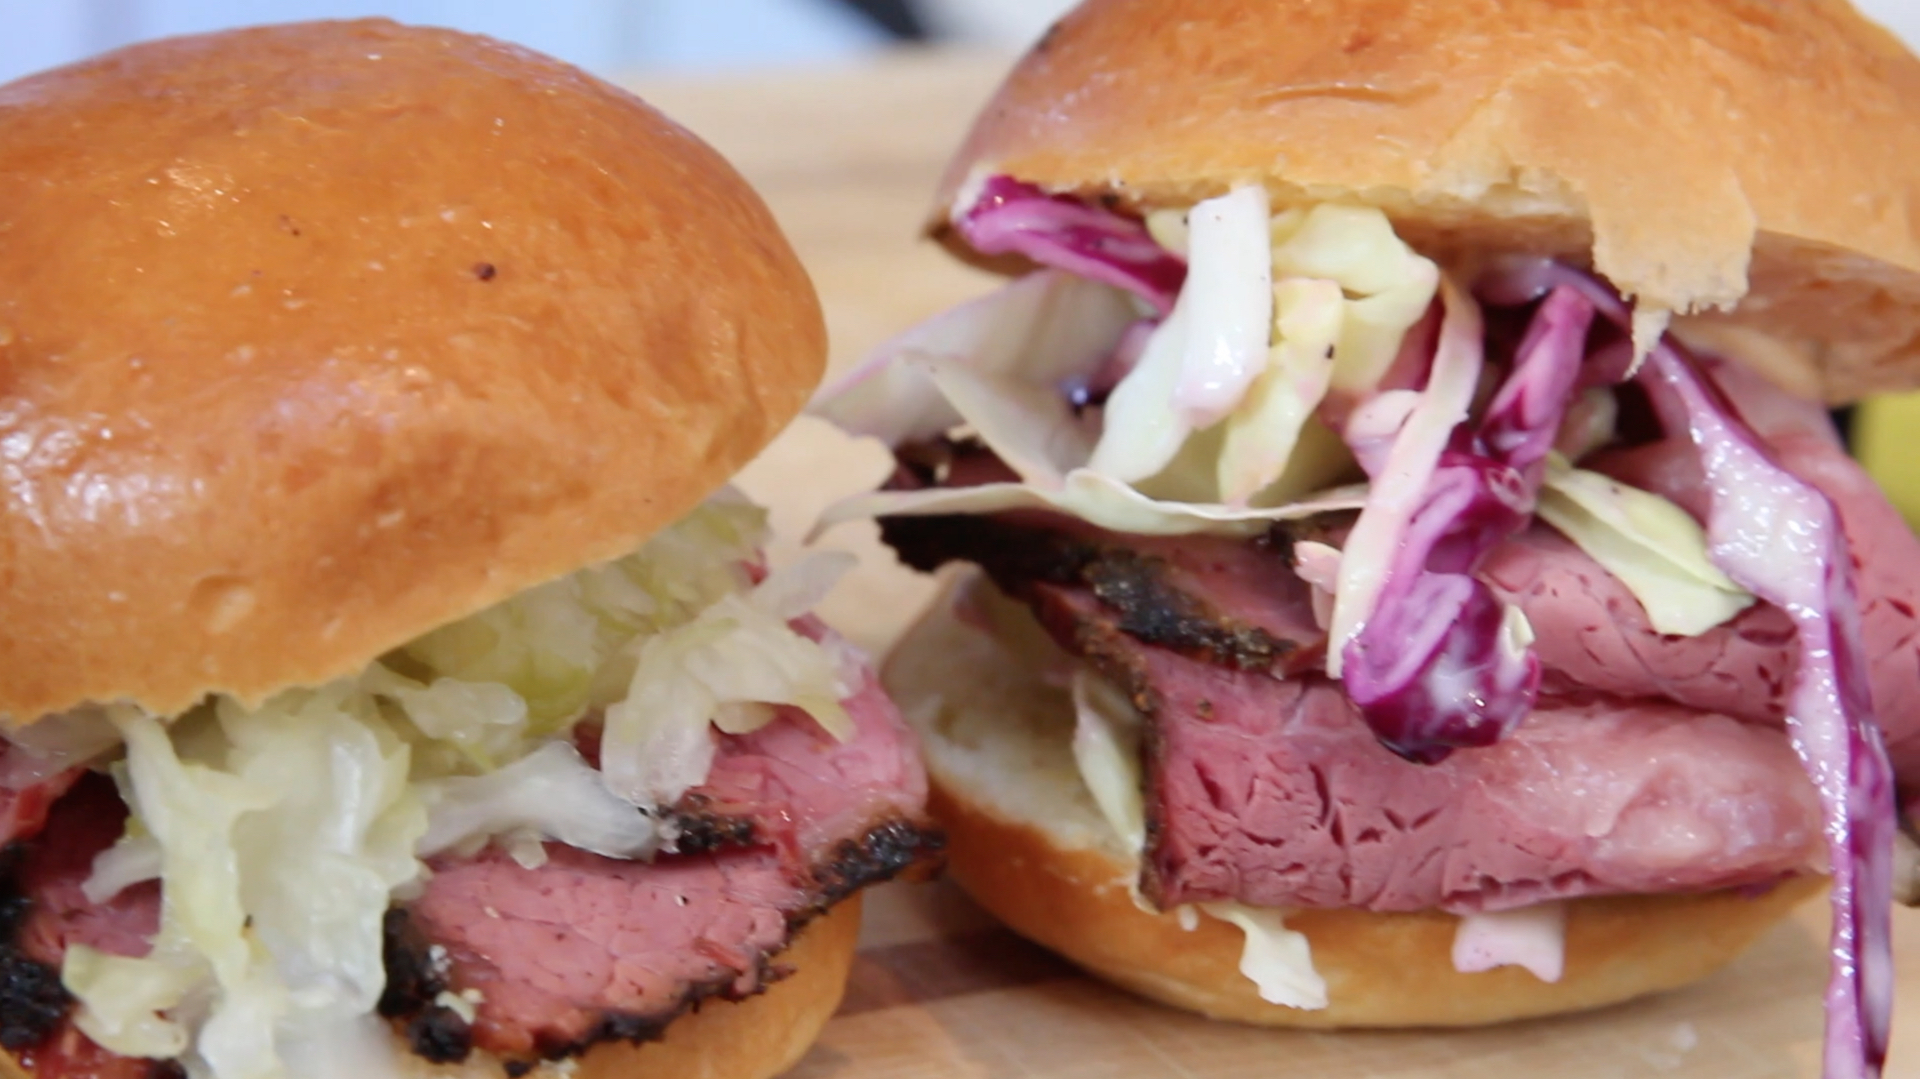 Smoked Corned Beef Sandwiches  following Coleslaw